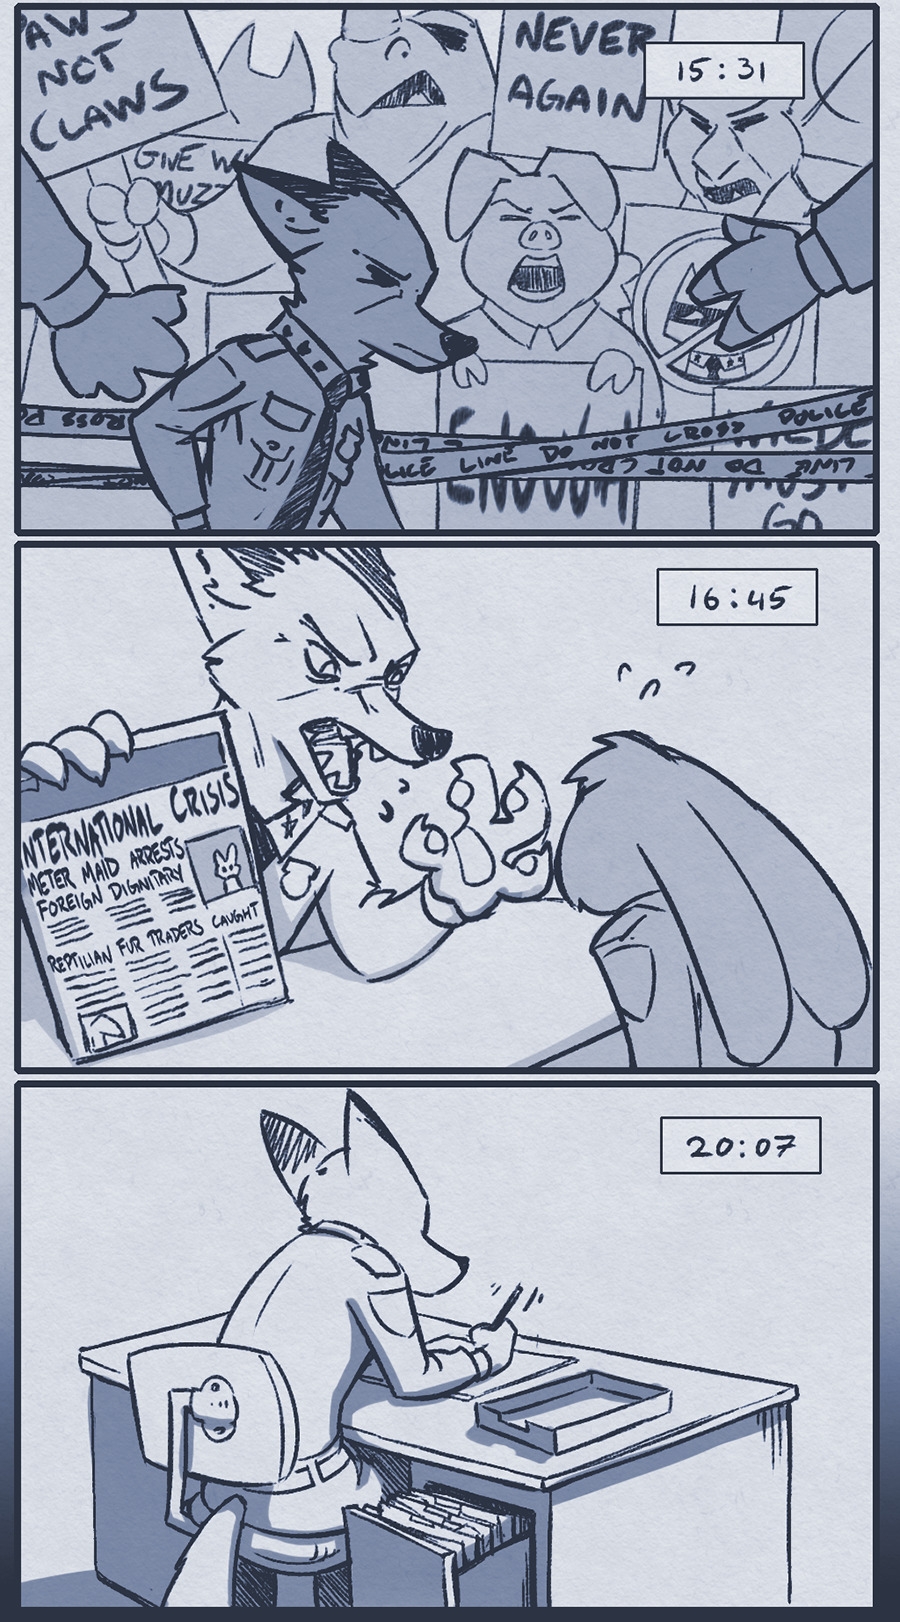 [Mead] Judy is dead AU 4 - The last day (Zootopia) 7